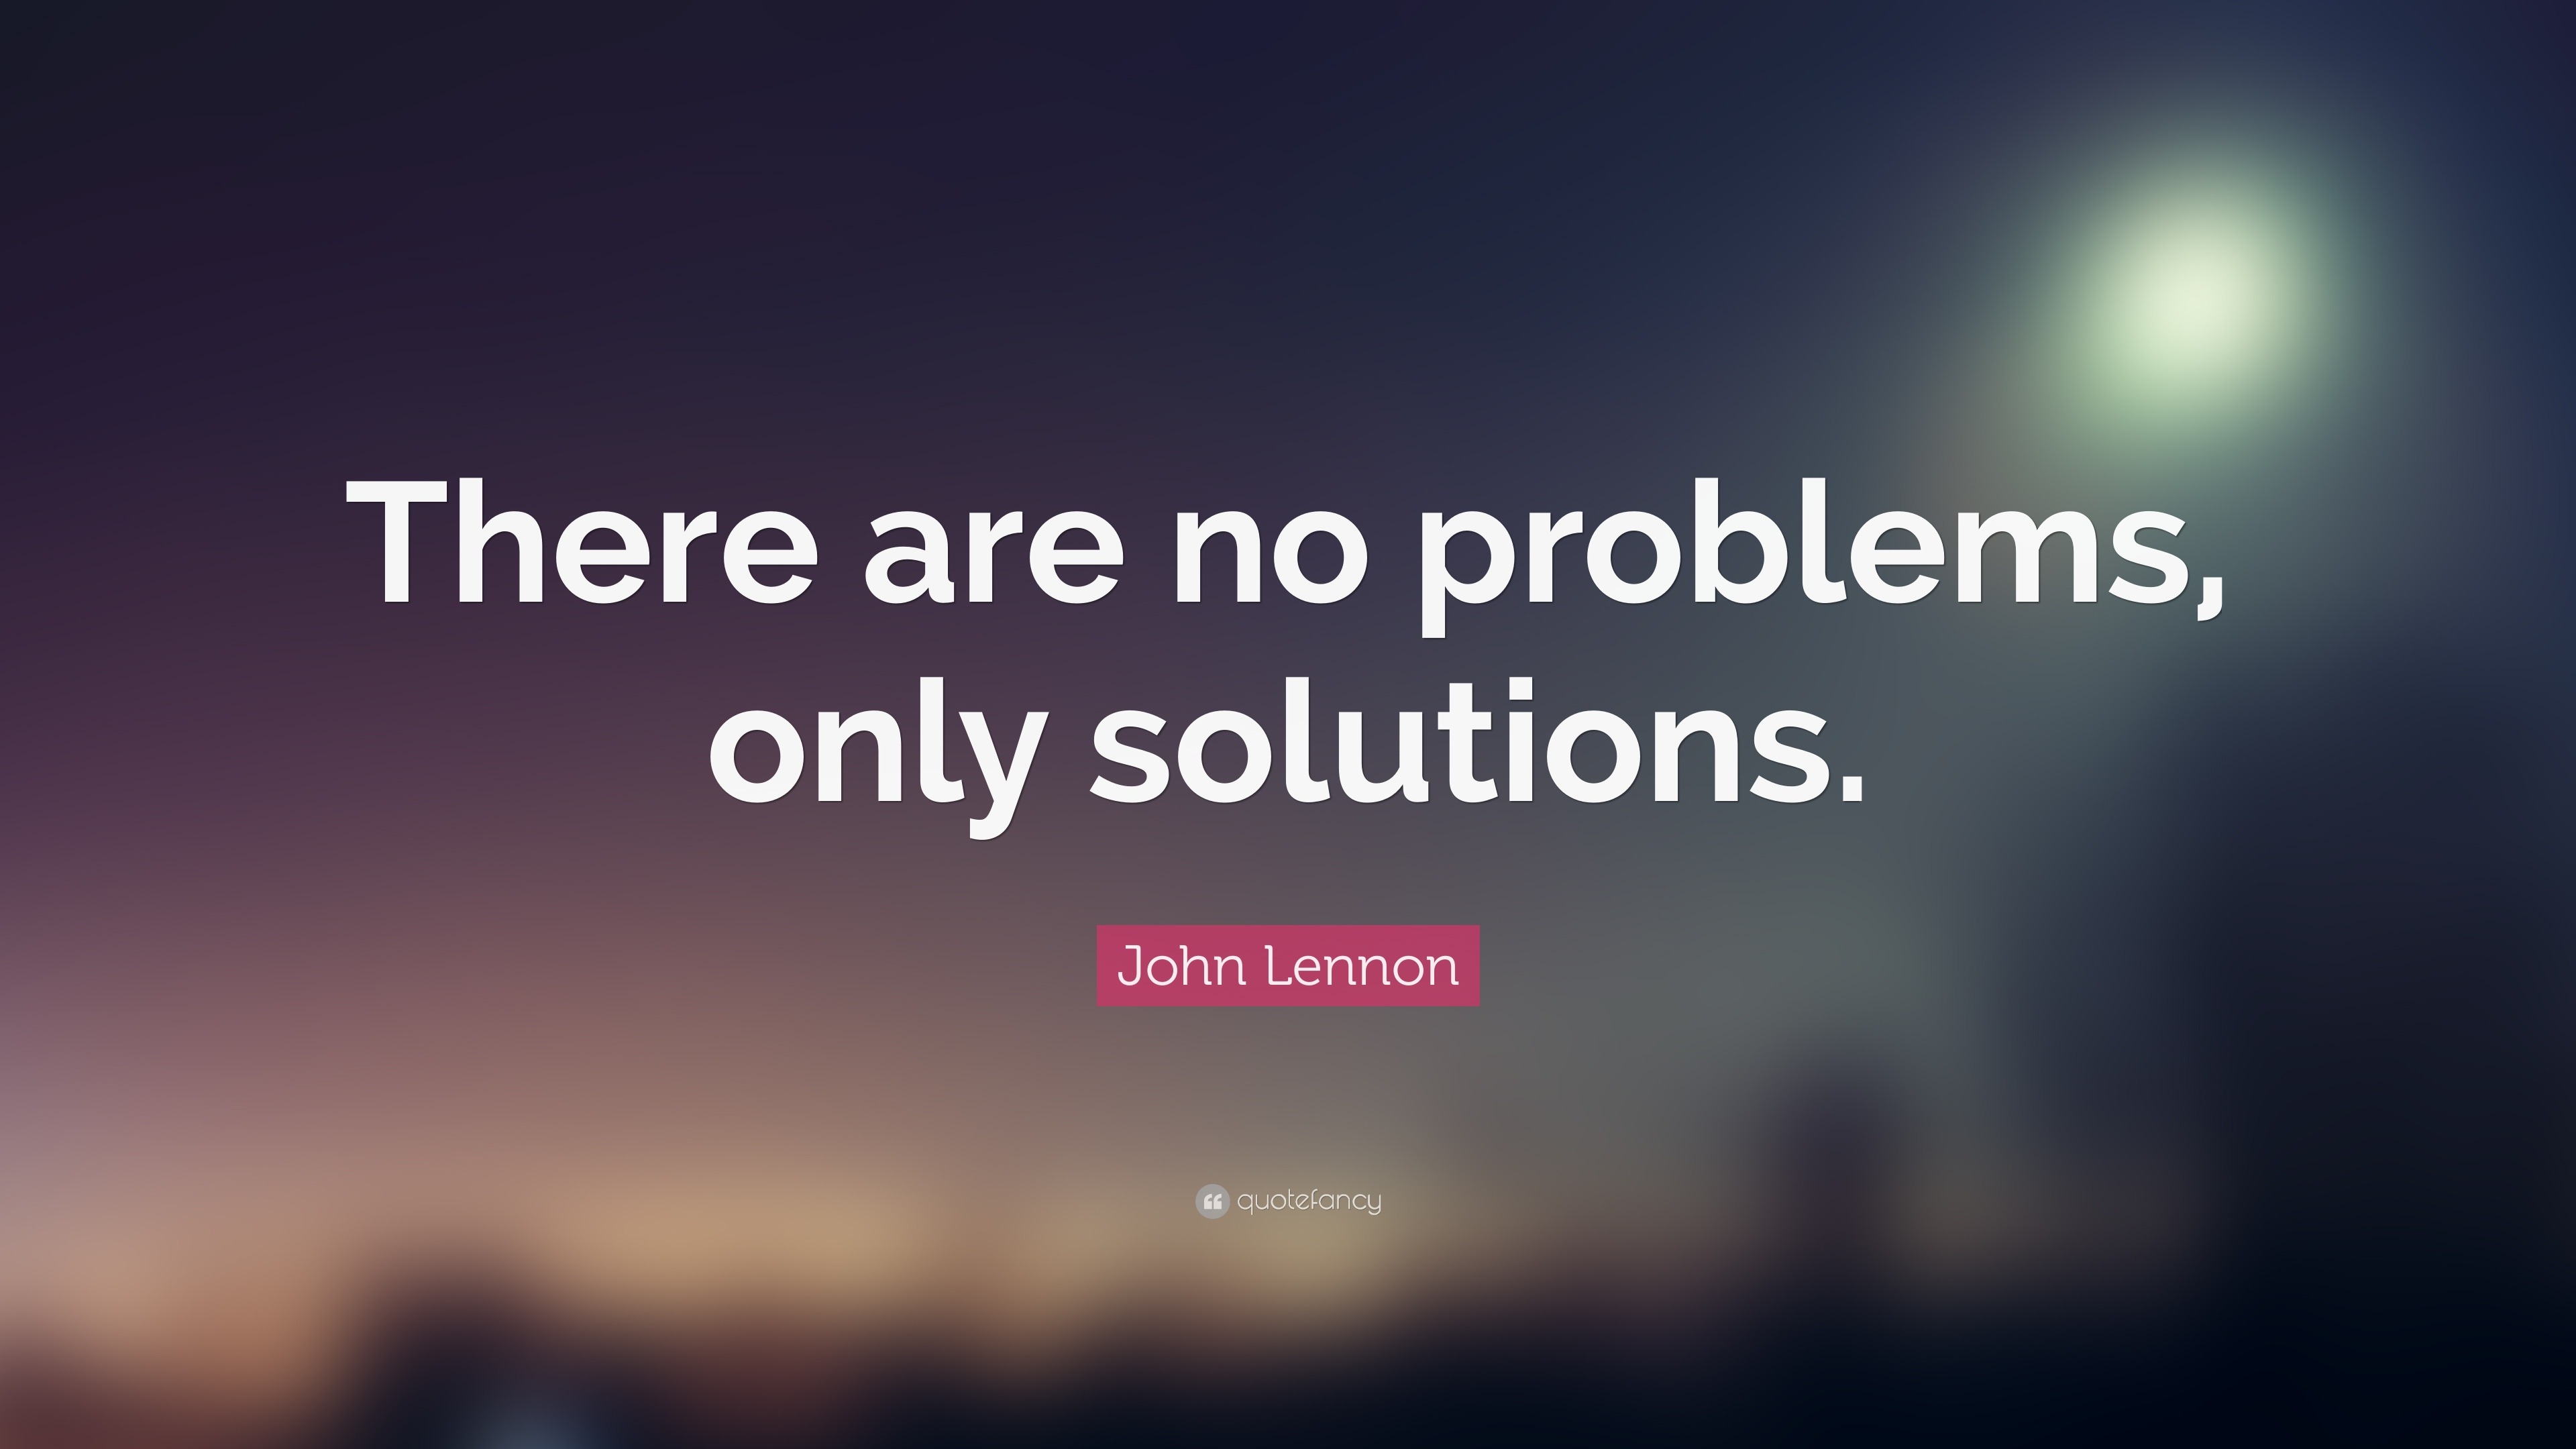 John Lennon Quote: “There are no problems, only solutions.”